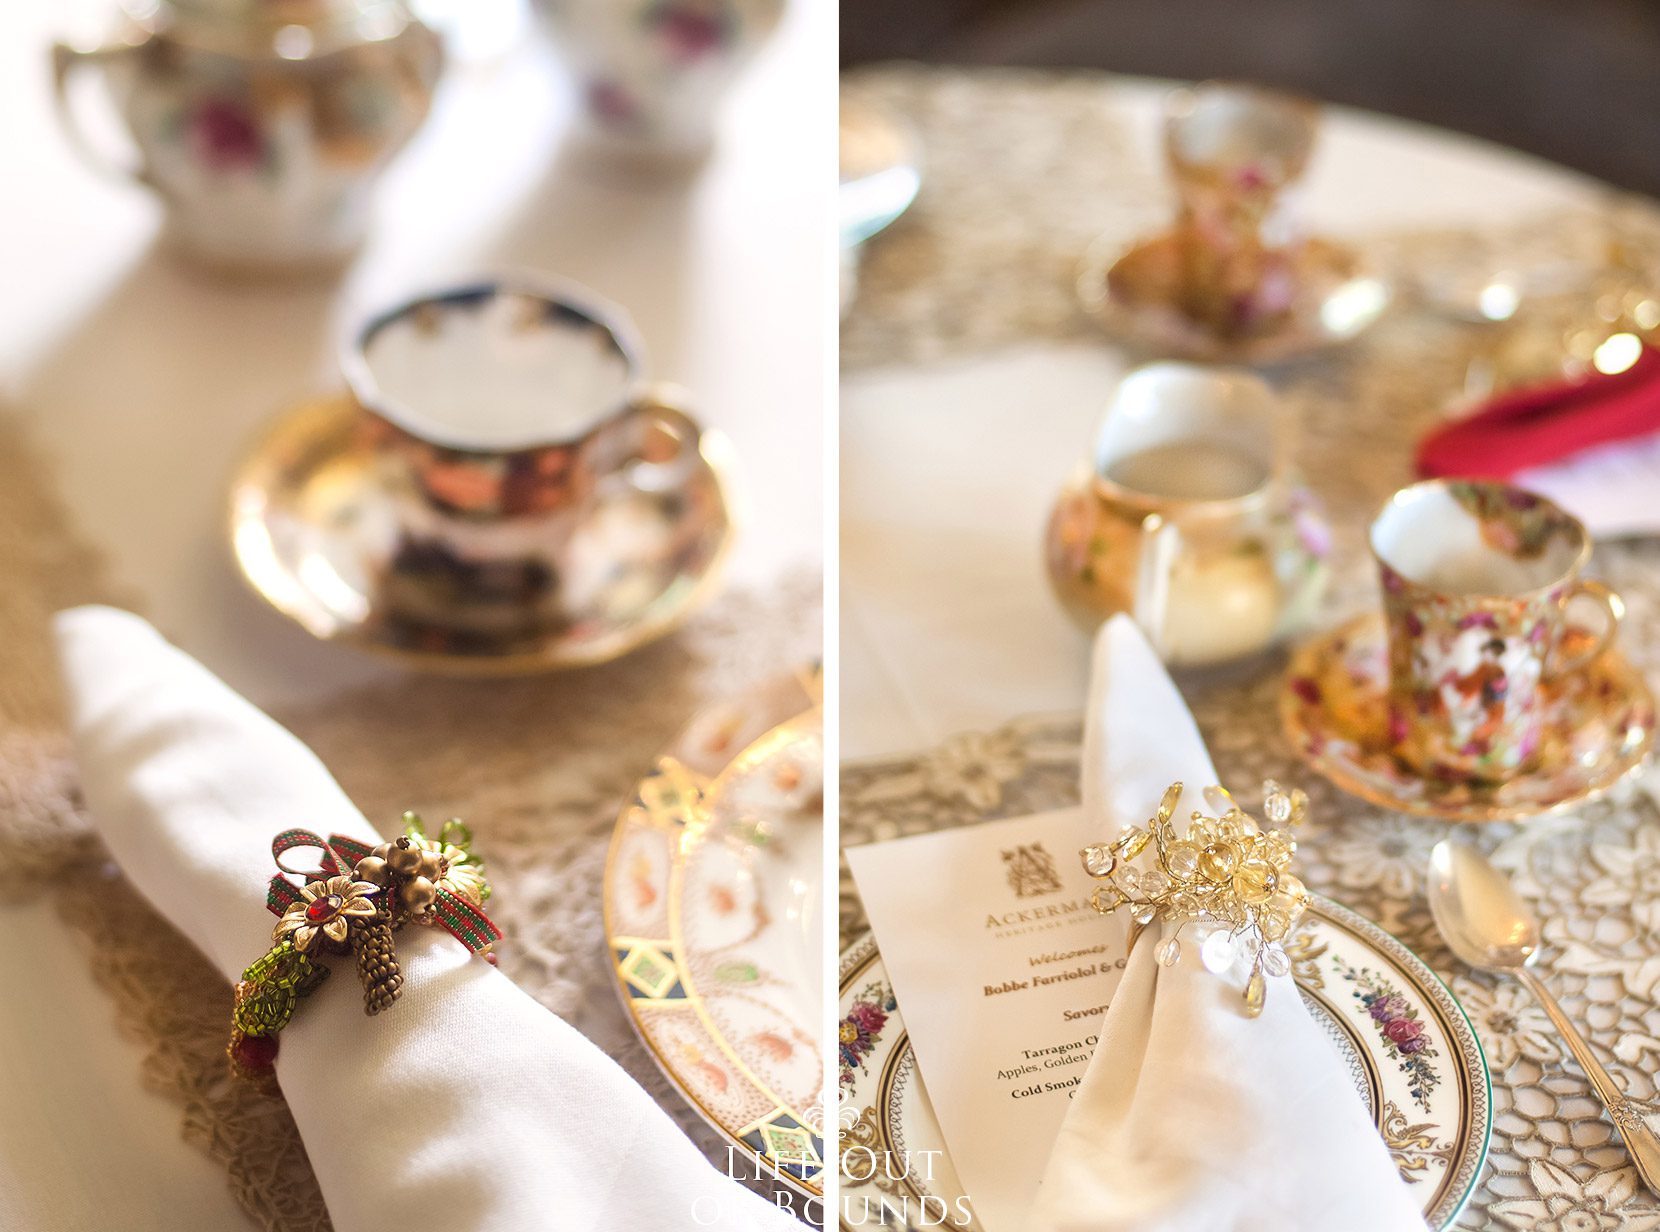 Holiday-Afternoon-tea-at-Ackerman-Heritage-House-a-Victorian-Home-in-Napa-California